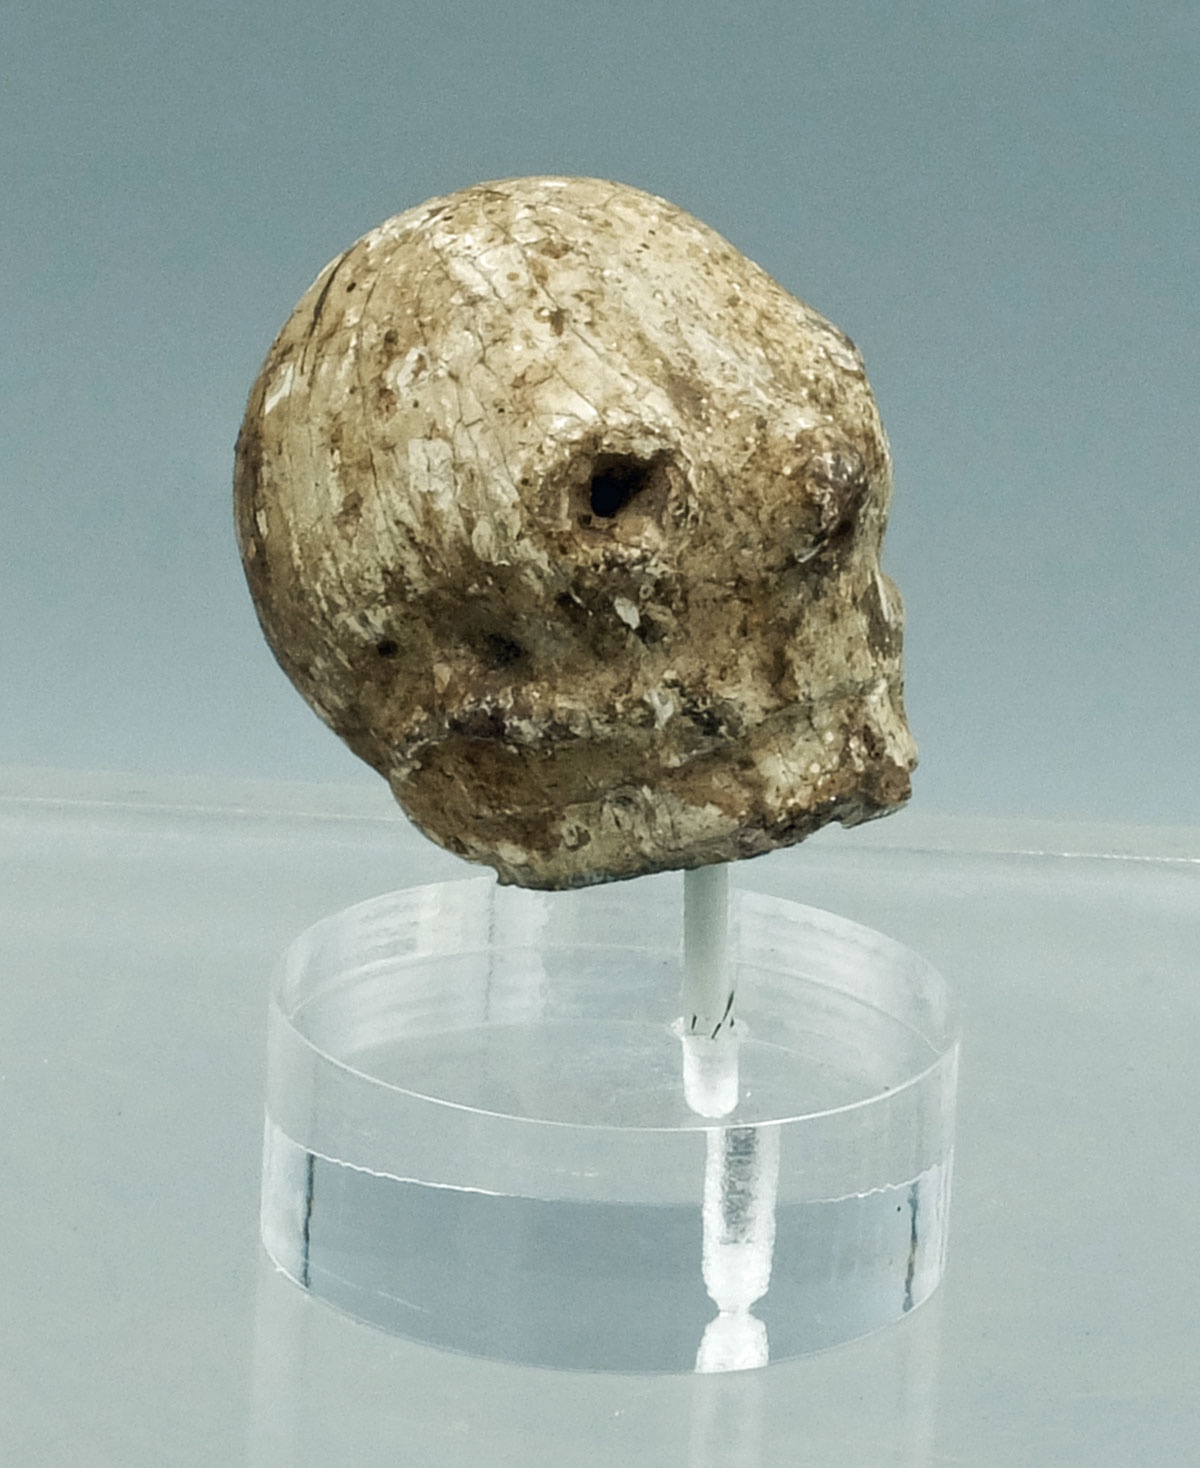 Human Skull Amulet - Teotihuacan, Mexico - Image 2 of 3